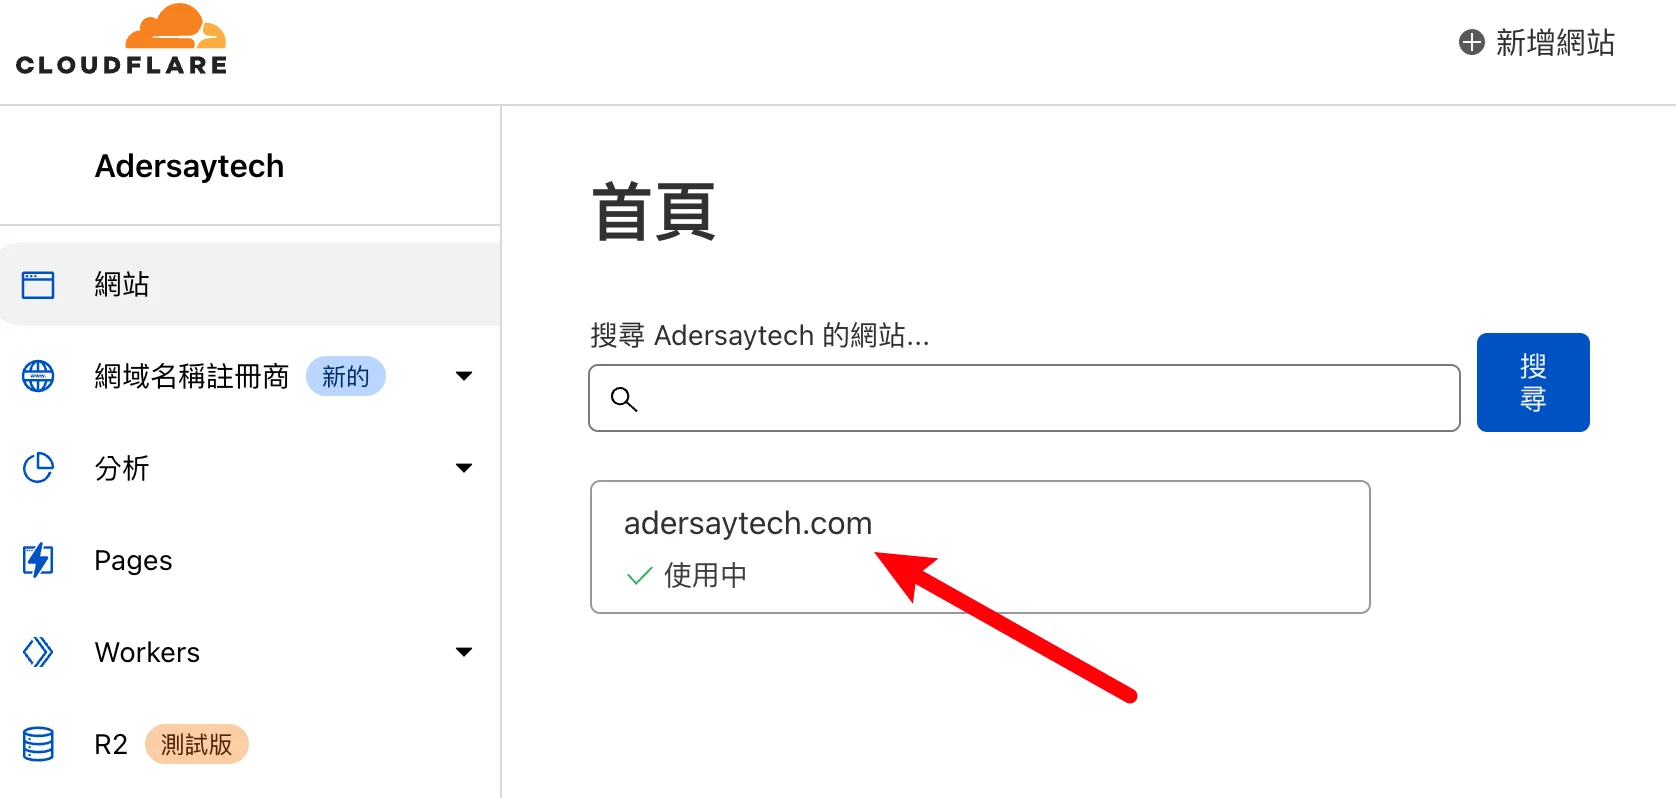 Cloudflare Email Routing 電子郵件路由，可免費自訂網域信箱！ 9